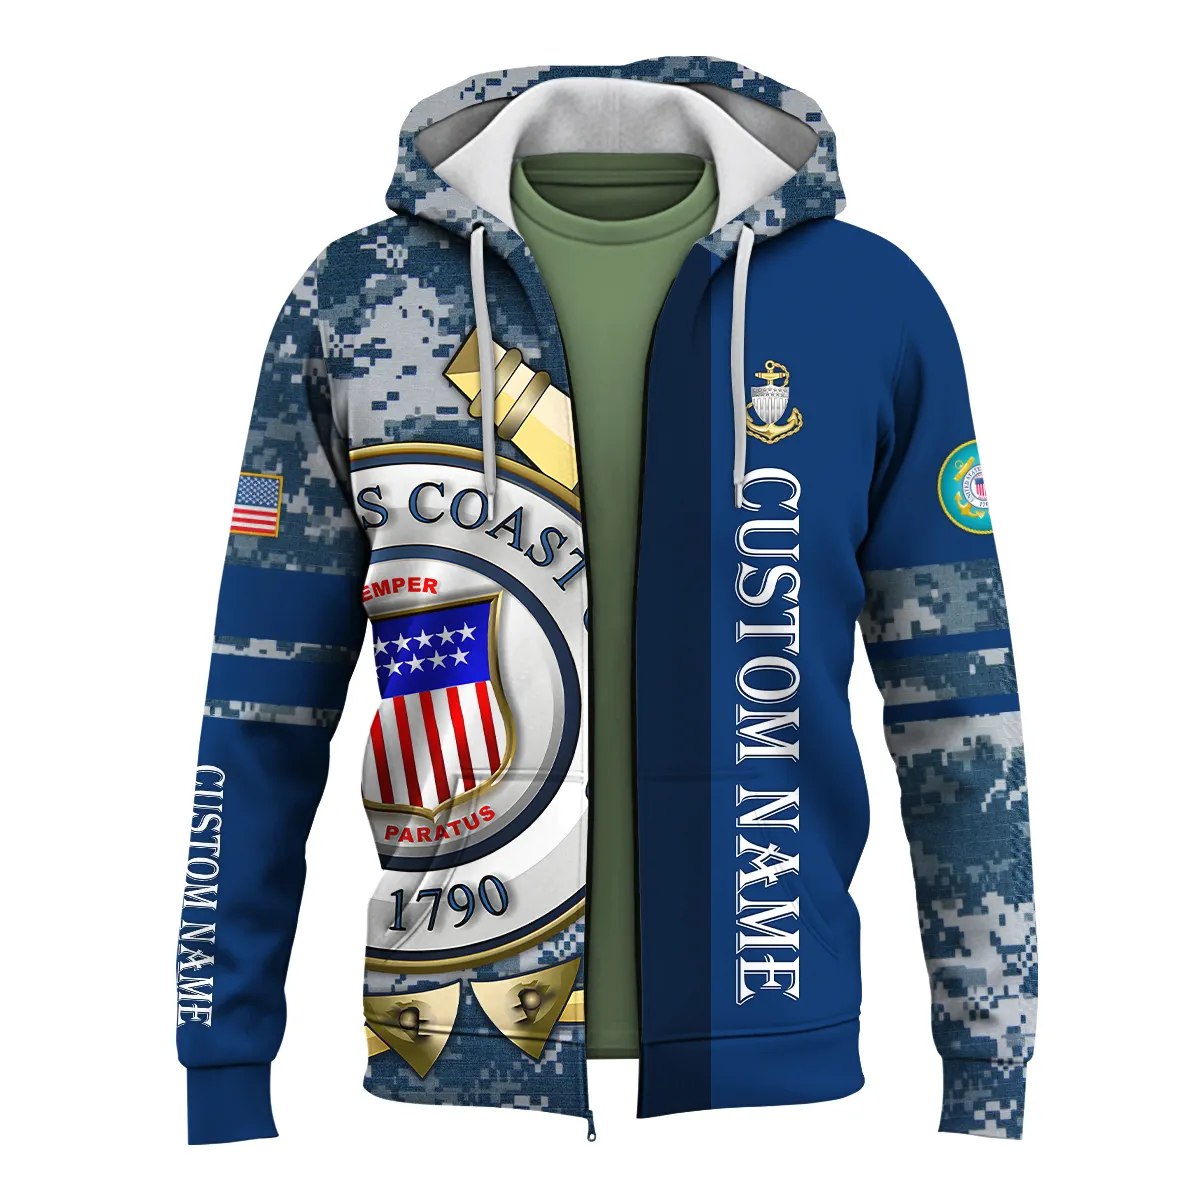 Personalized Gift Being A Veteran Never Ends Camo Pattern U.S. Coast Guard Apparel All Over Prints BLVTR210624A02CG